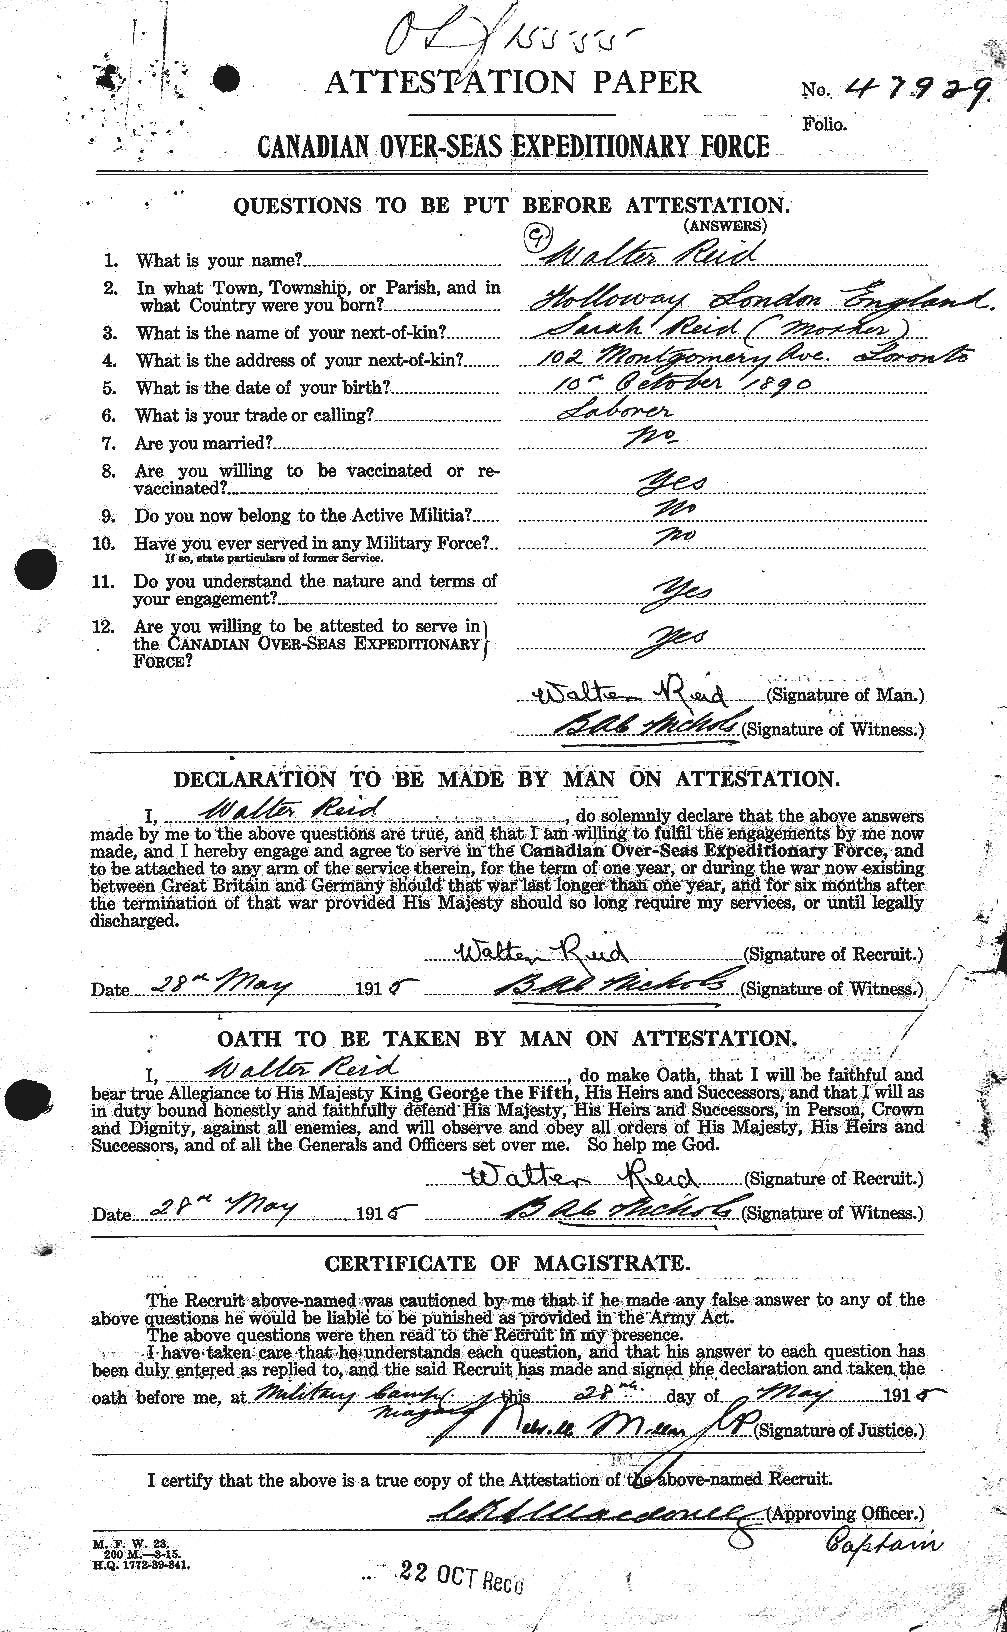 Personnel Records of the First World War - CEF 596880a